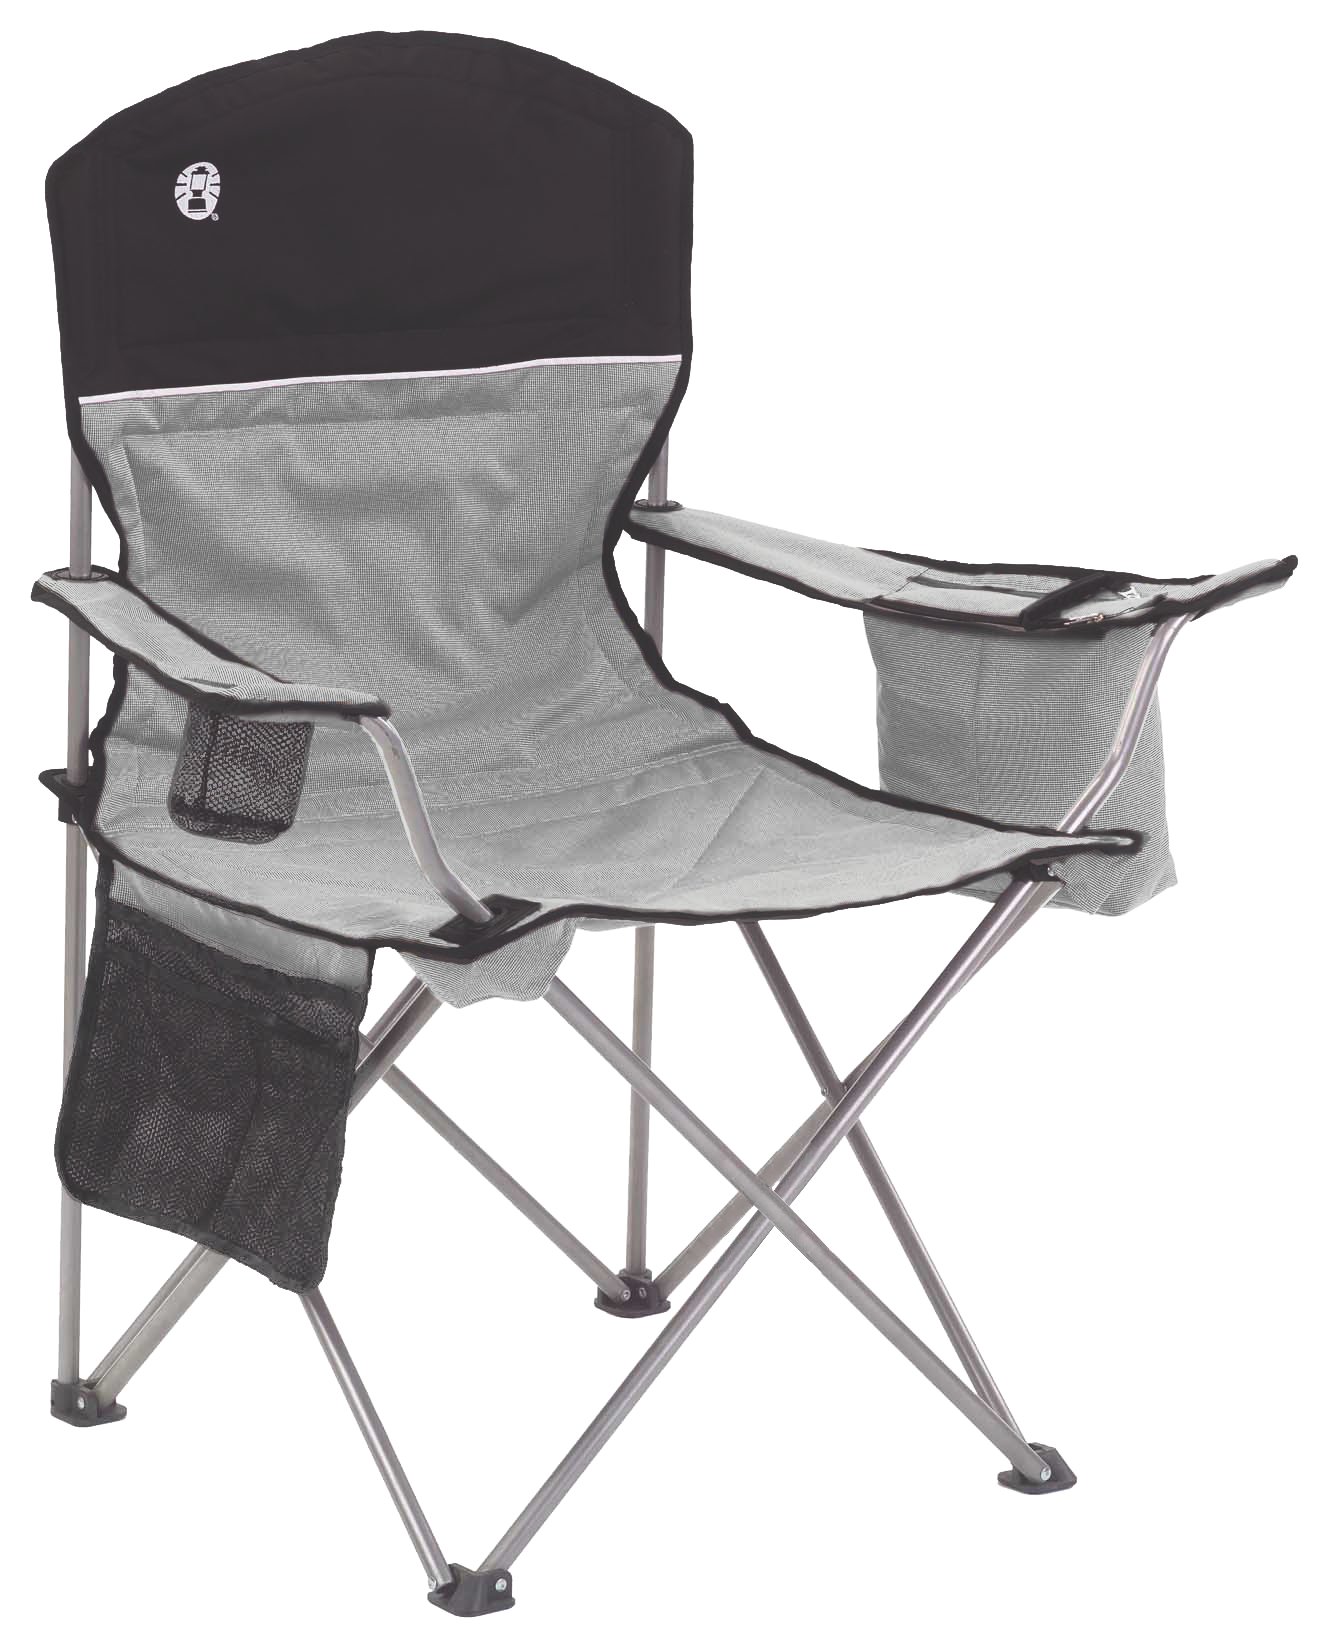 ARROWHEAD OUTDOOR Portable Folding Camping Quad Chair w/ 4-Can Cooler,  Cup-Holder, Heavy-Duty Carrying Bag w/ Easy Carry Shoulder Strap, Padded  Armrests, Supports up to 330lbs, USA-Based Support (Tan) 